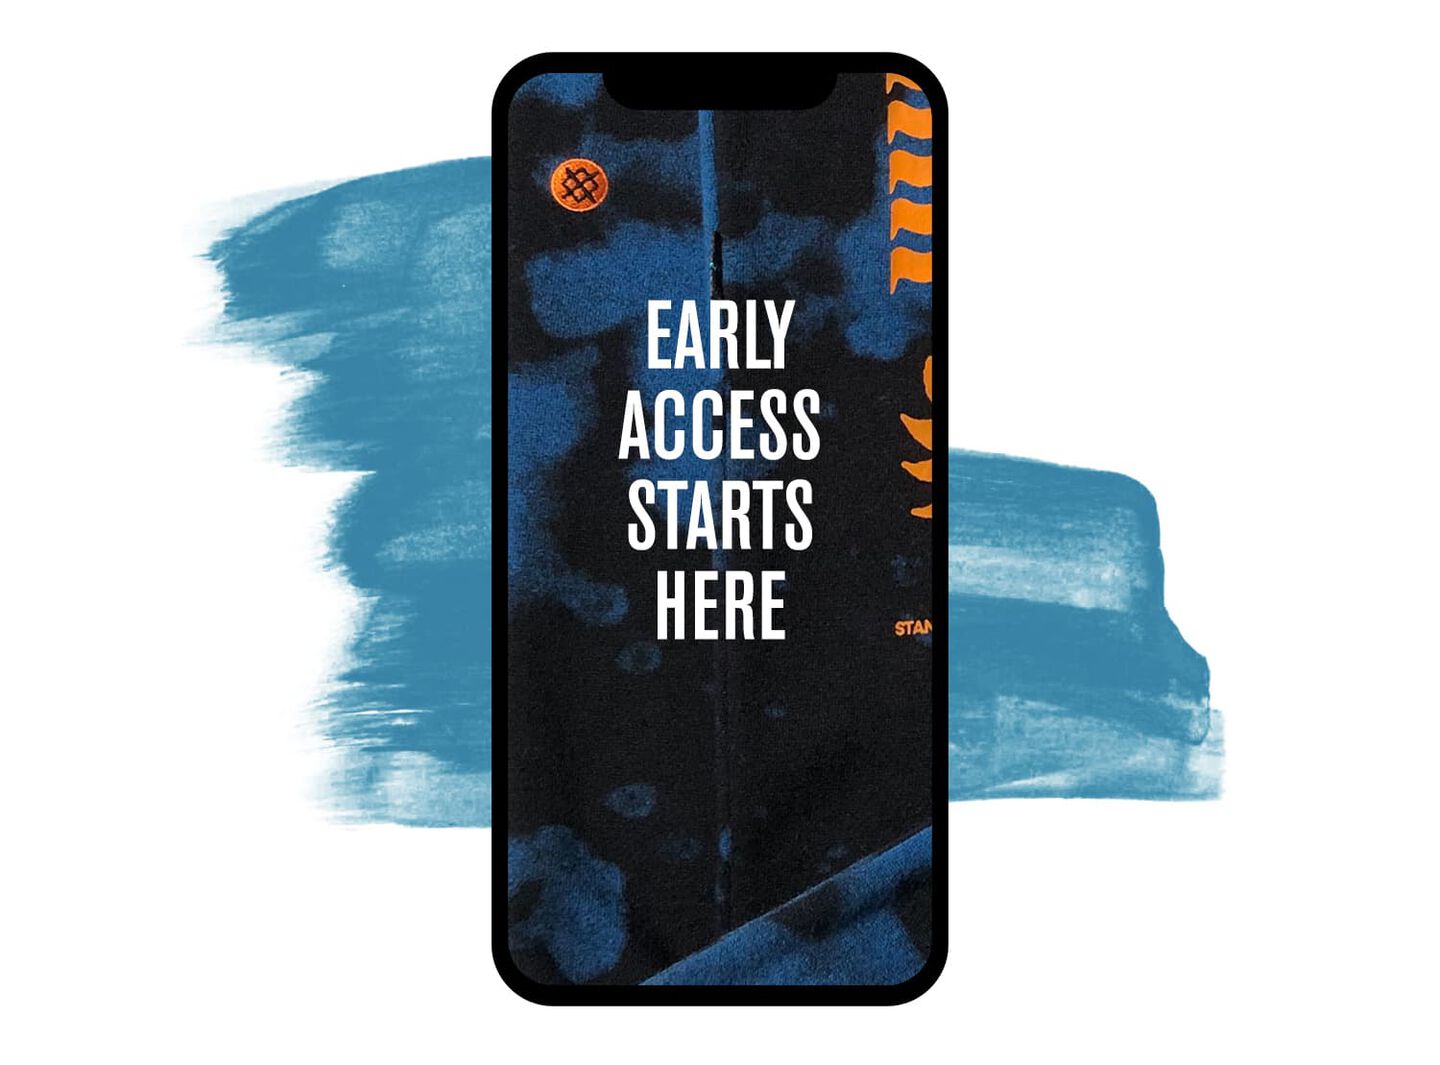 Image of a phone on a white background, the screen reads "Early access starts here"